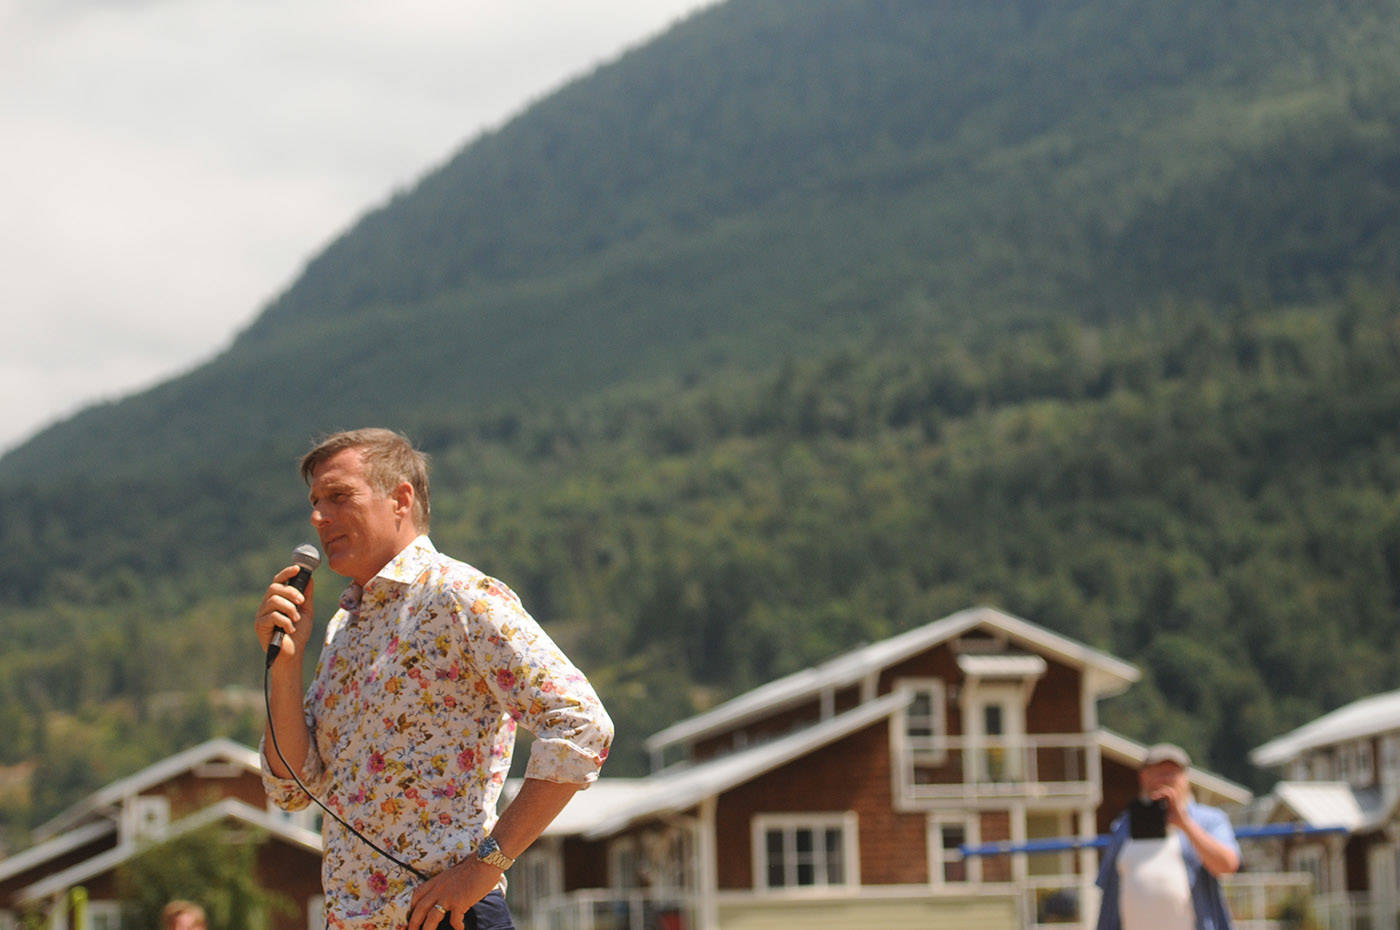 Maxime Bernier, leader of the People’s Party of Canada, speaks during a stop on his Mad Max Summer 2021 Pre-Election Tour at Yarrow Pioneer Park on Saturday, July 17, 2021. (Jenna Hauck/ Chilliwack Progress)